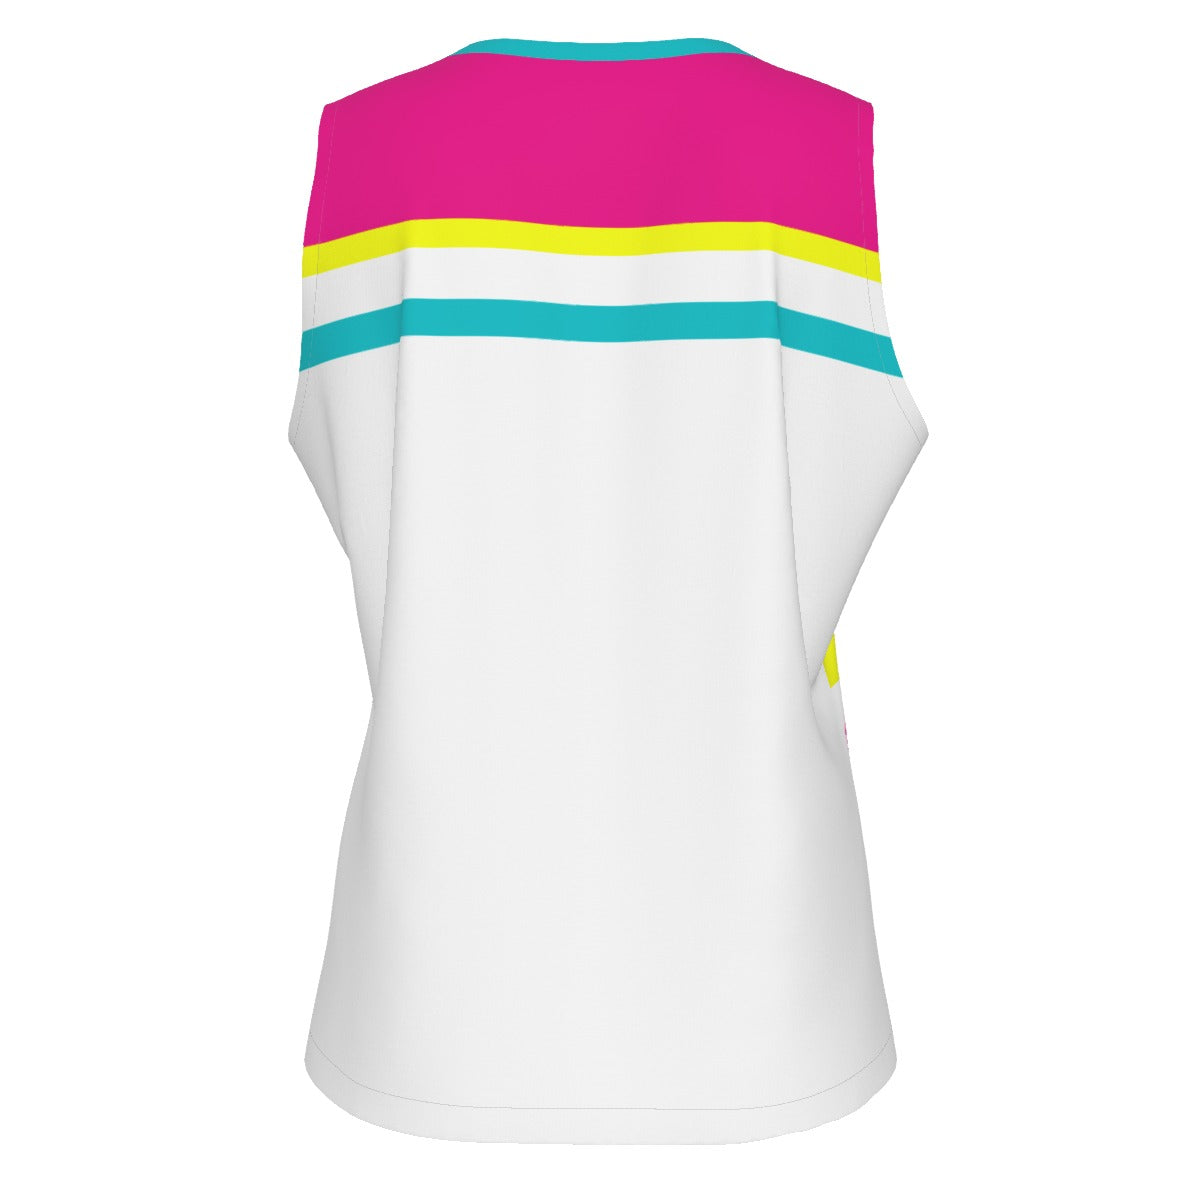 It's Swell - White - Hot Pink - Sports Tank Top by Dizzy Pickle